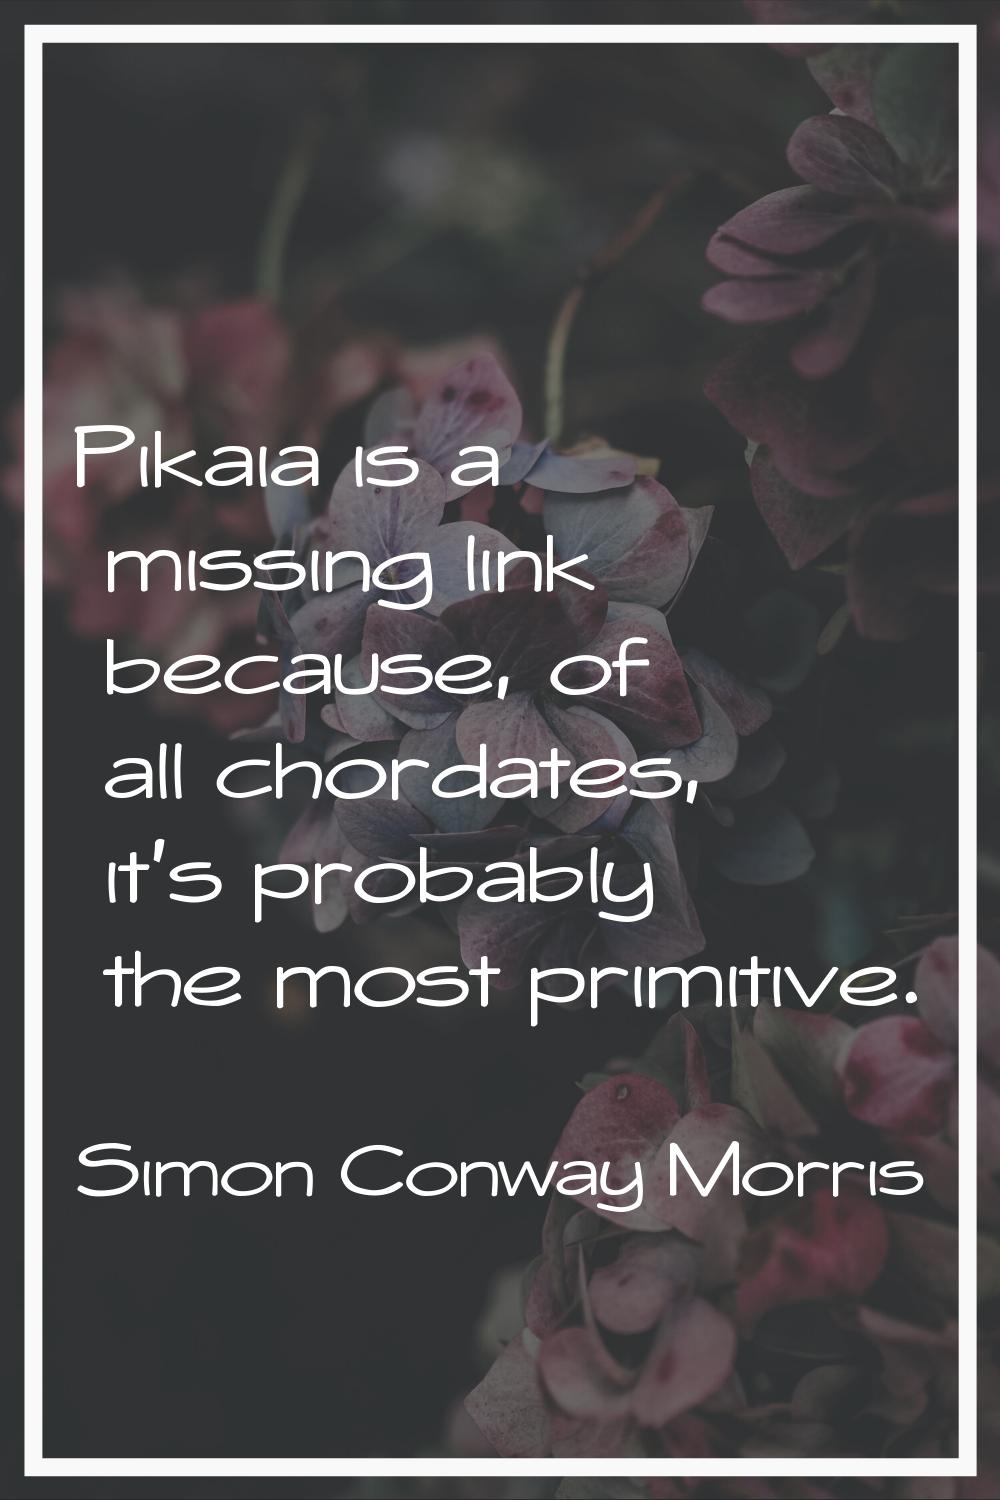 Pikaia is a missing link because, of all chordates, it's probably the most primitive.